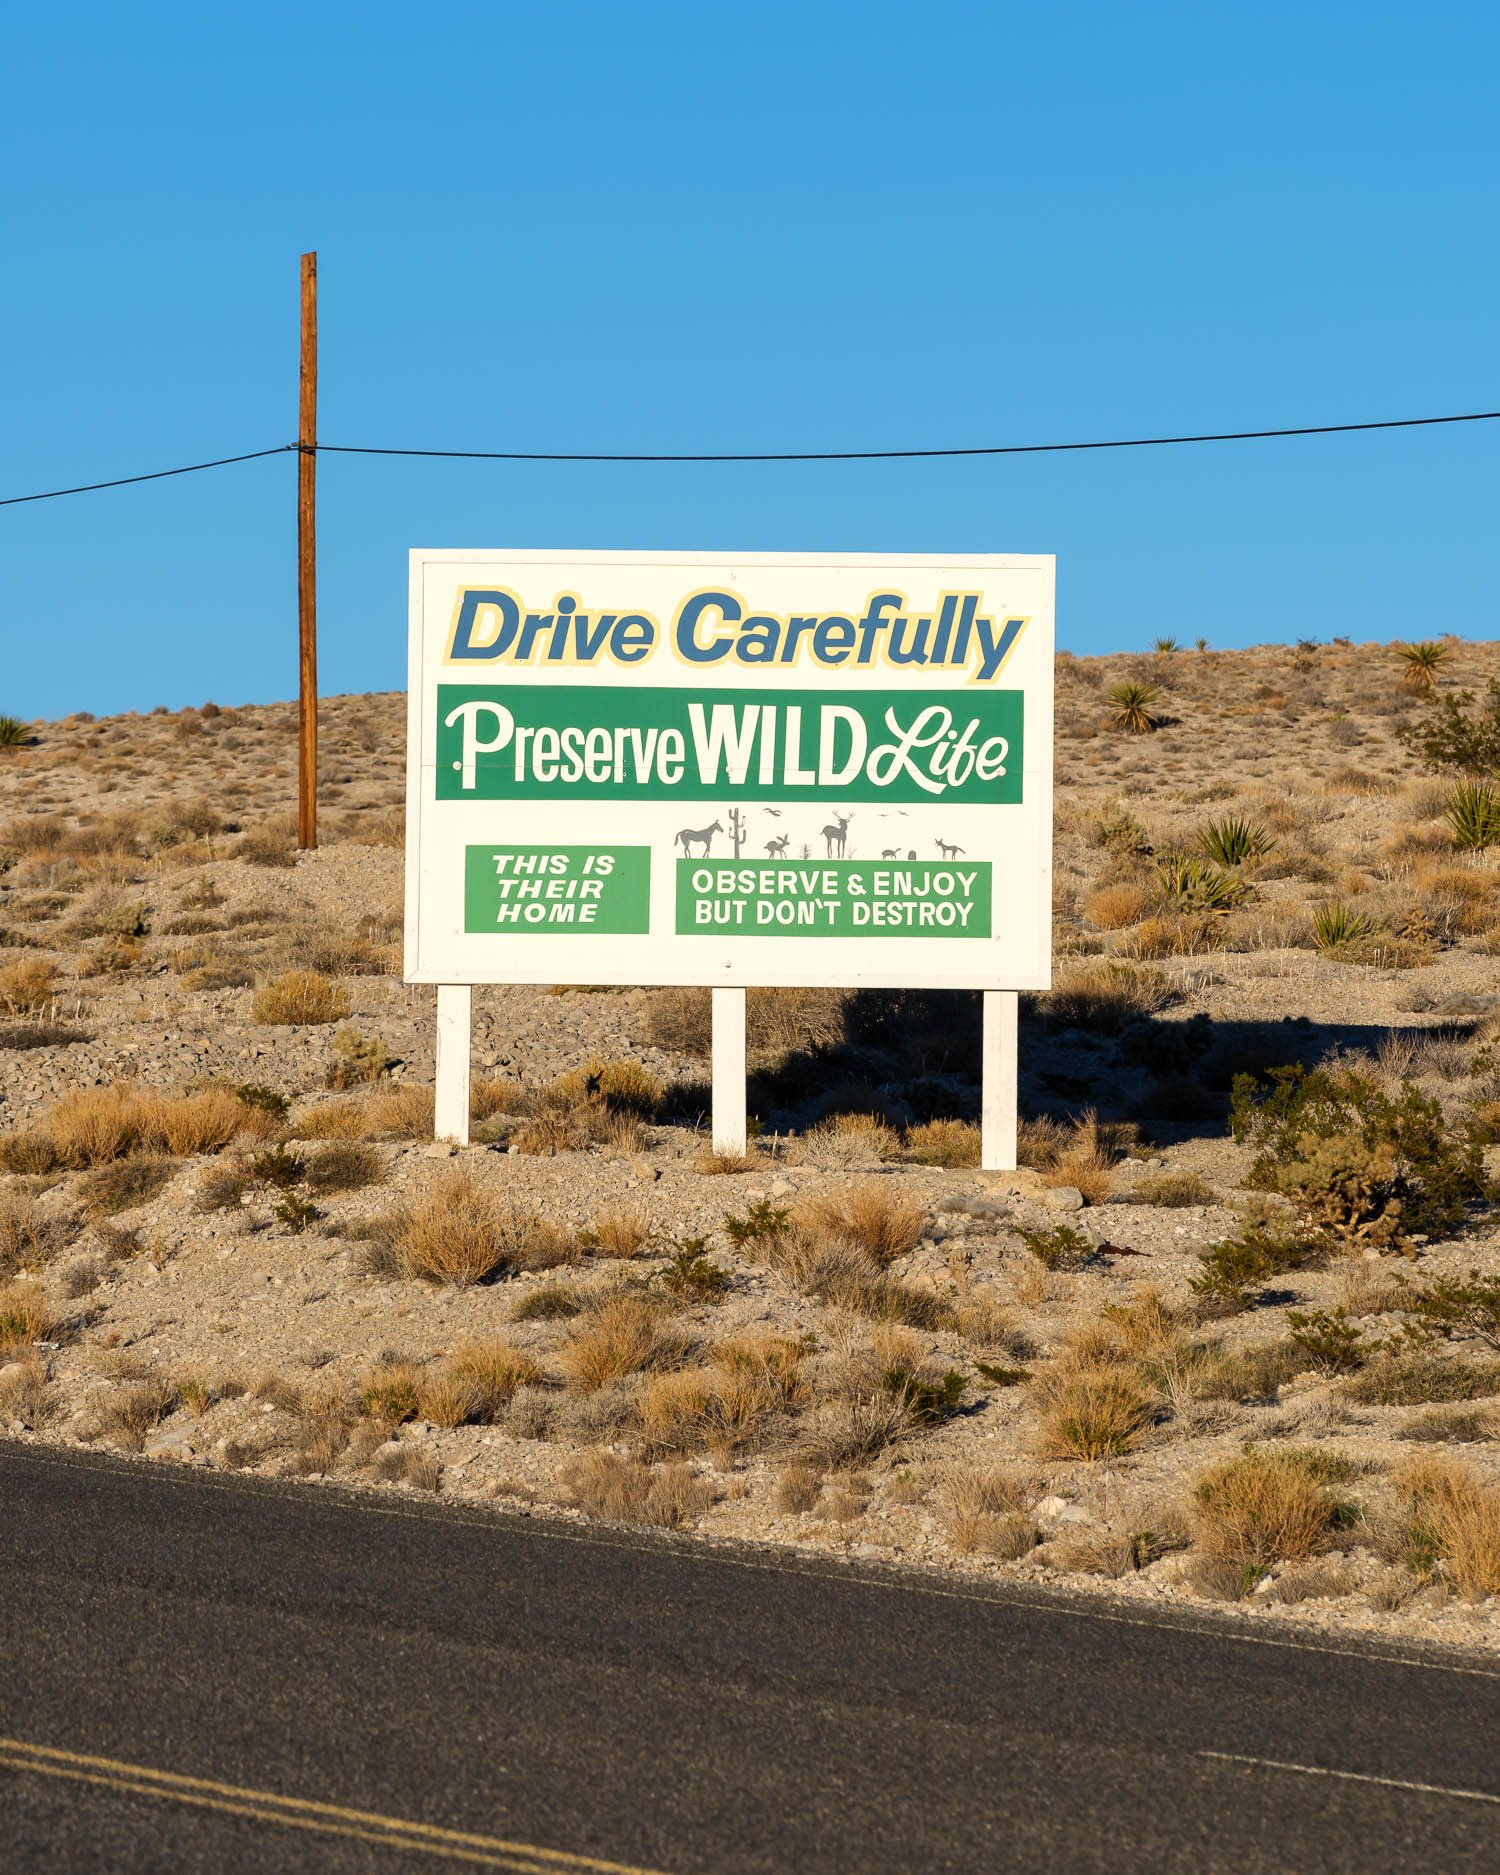  “Preserve Wildlife” sign at one of the most nuked places on the planet 